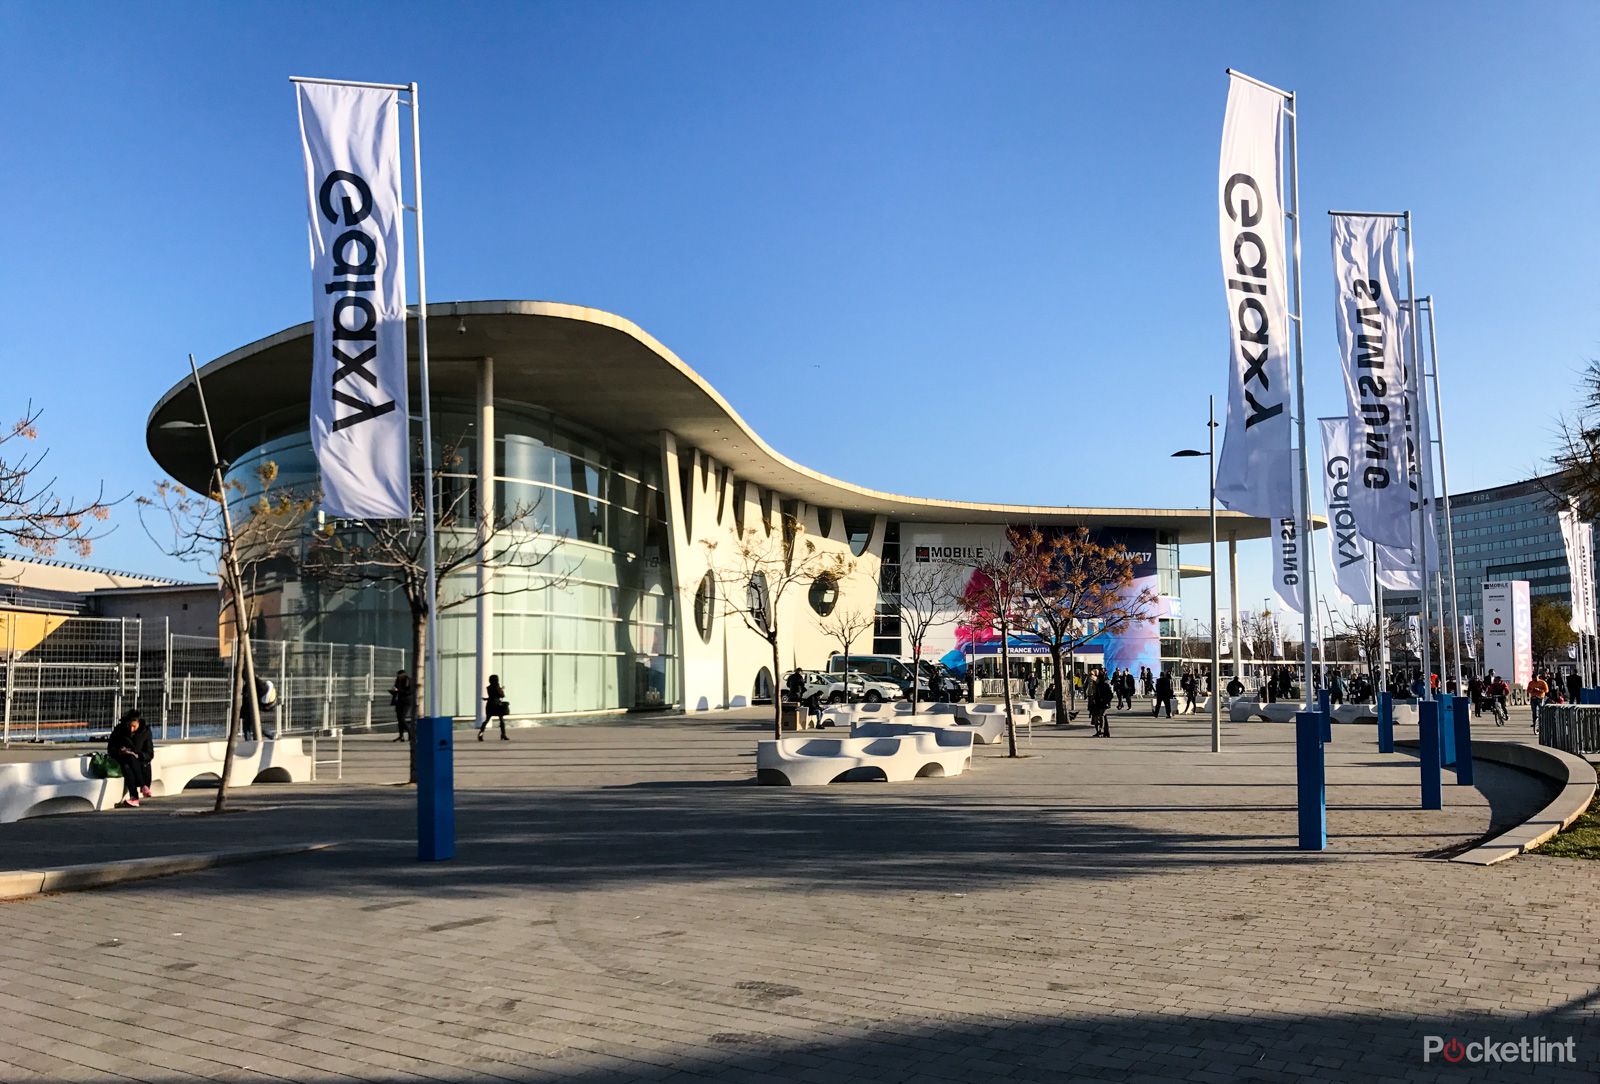 mobile world congress 2019 all the latest announcements and news lead image 1